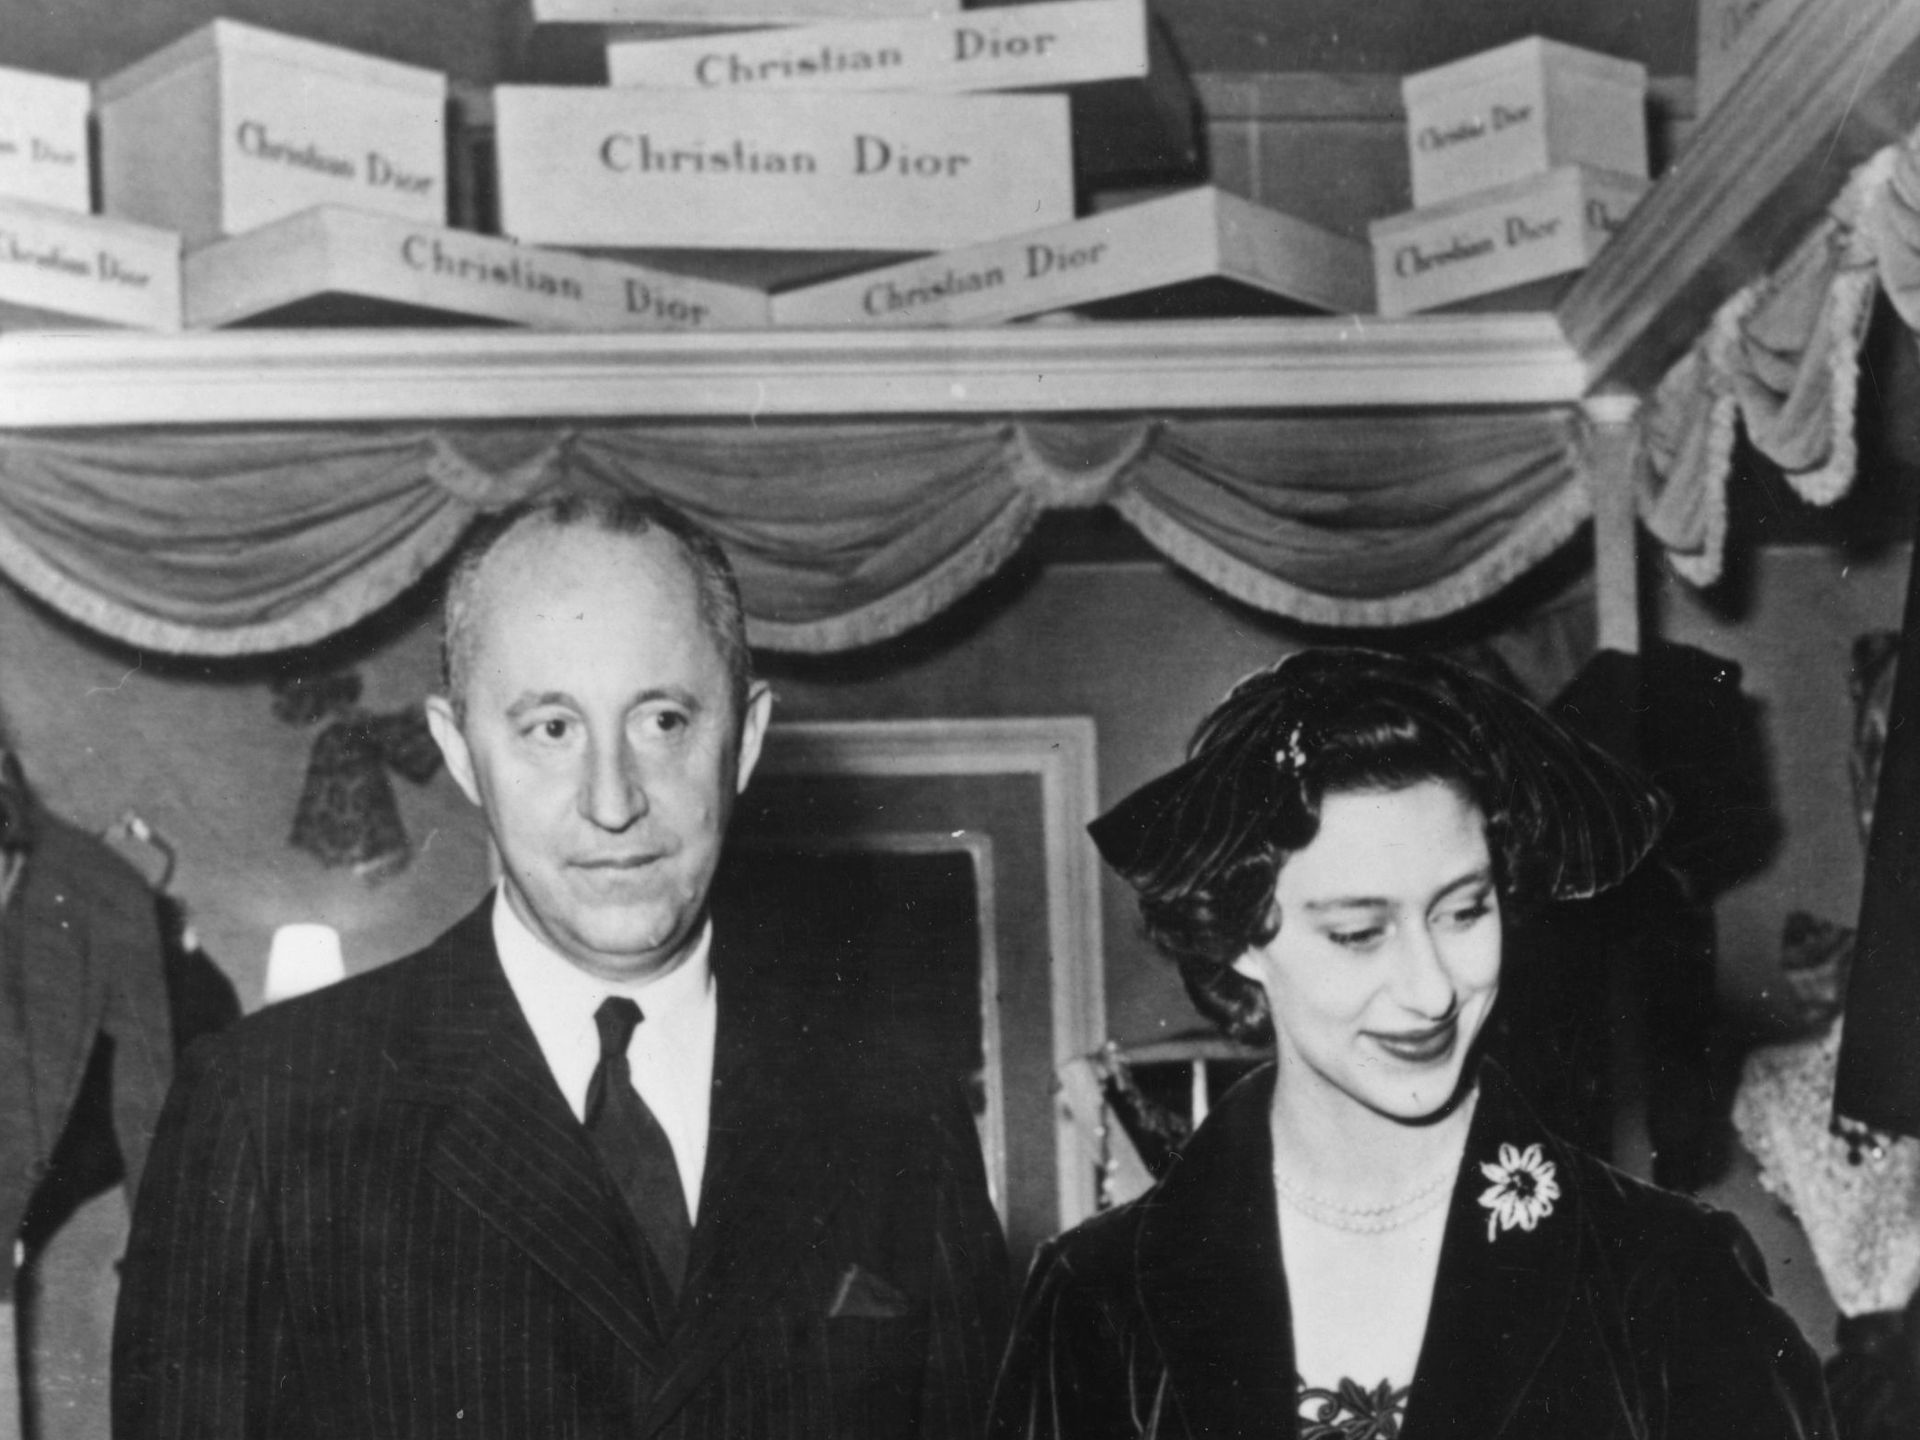 The True Story of Catherine Dior, Christian Dior's Sister, in 'The